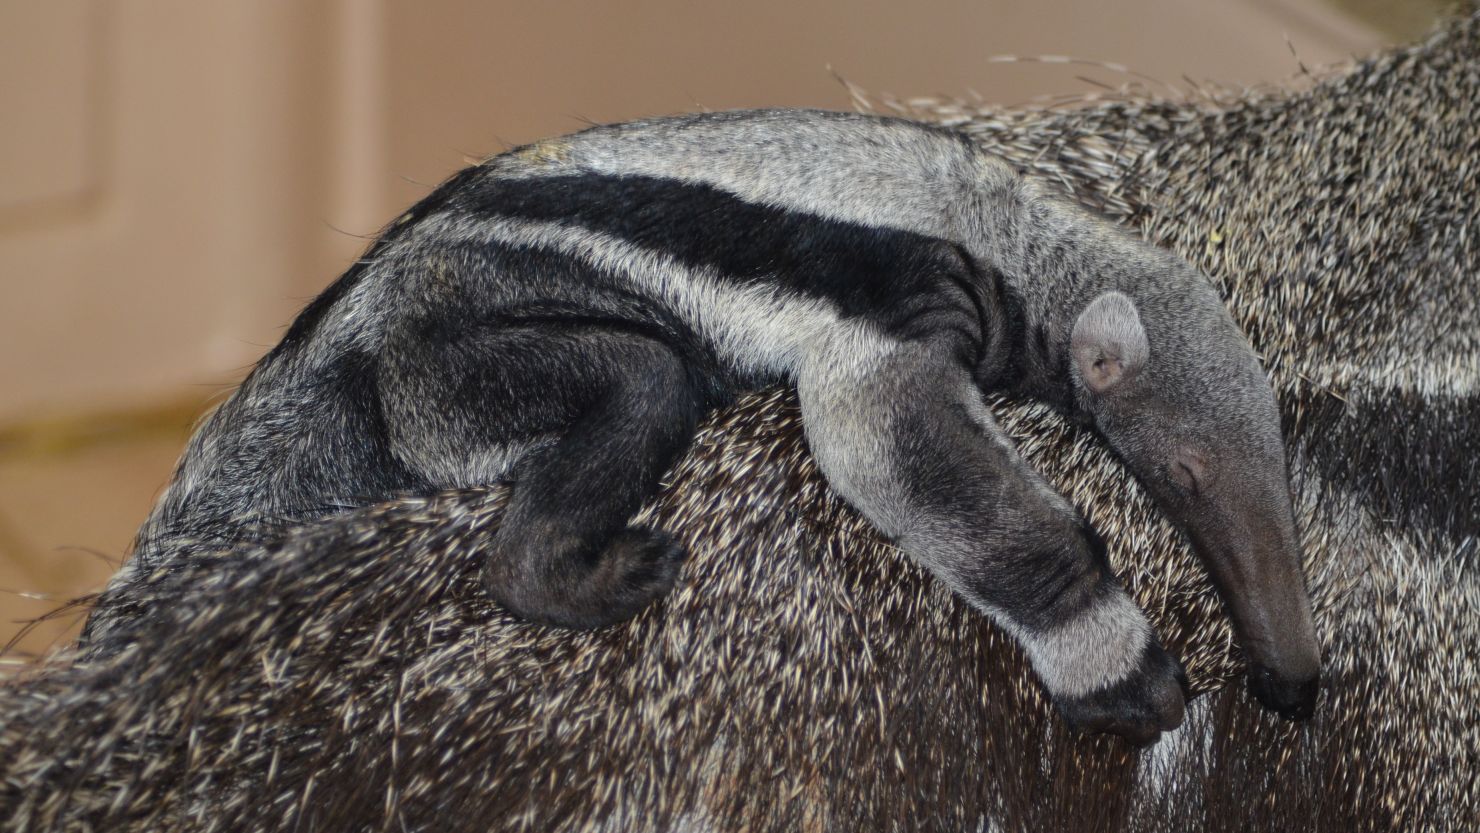 The birth of a baby anteater has zoo staff puzzled, since the adult male and female have been separated for eight months.